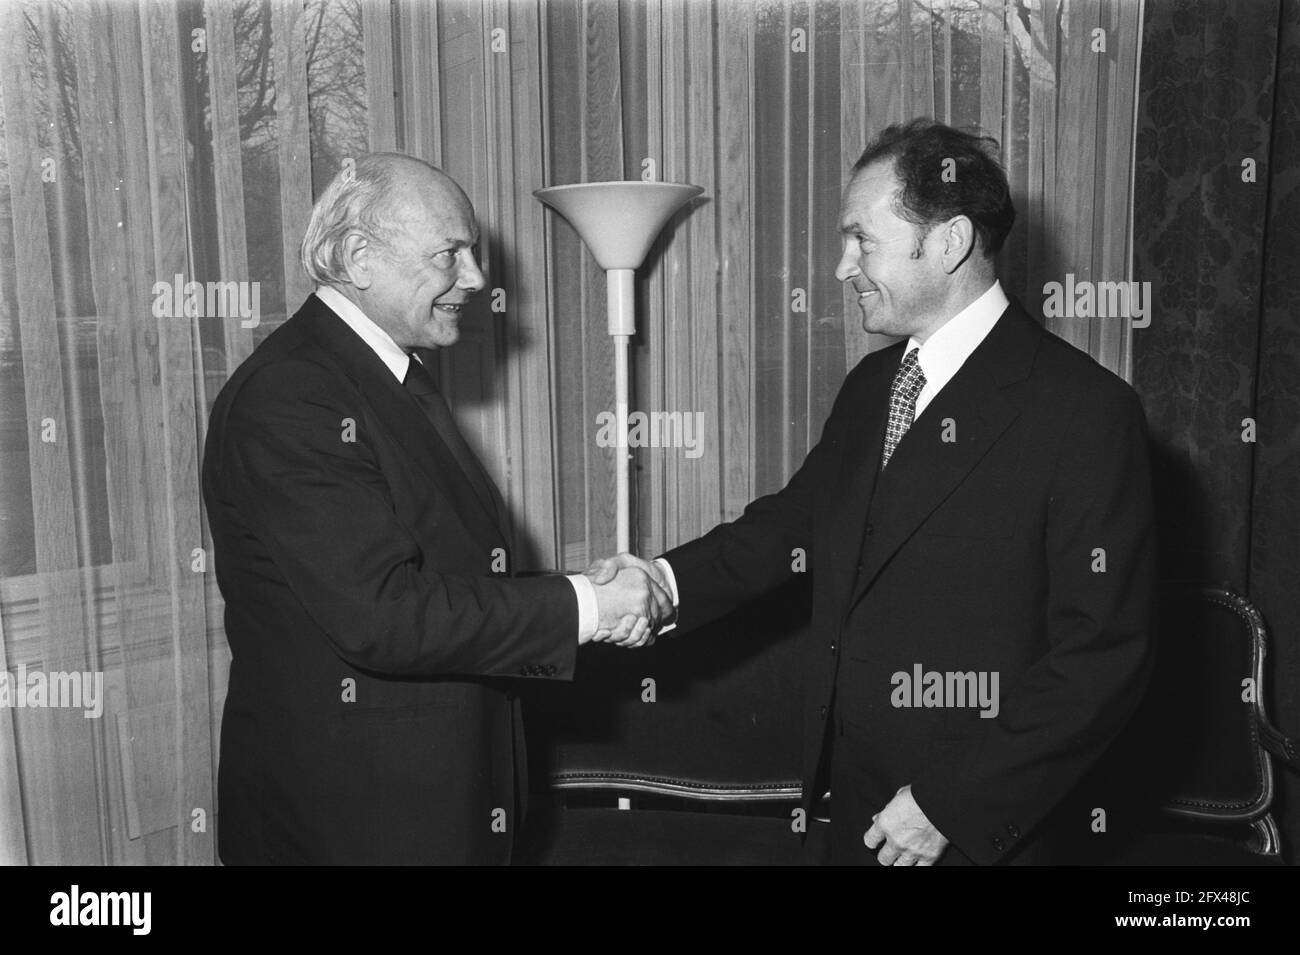 Prime Minister Den Uyl receives Foreign Minister of GDR, Oskar Fischer, greeting, January 24, 1977, greetings, receipts, The Netherlands, 20th century press agency photo, news to remember, documentary, historic photography 1945-1990, visual stories, human history of the Twentieth Century, capturing moments in time Stock Photo